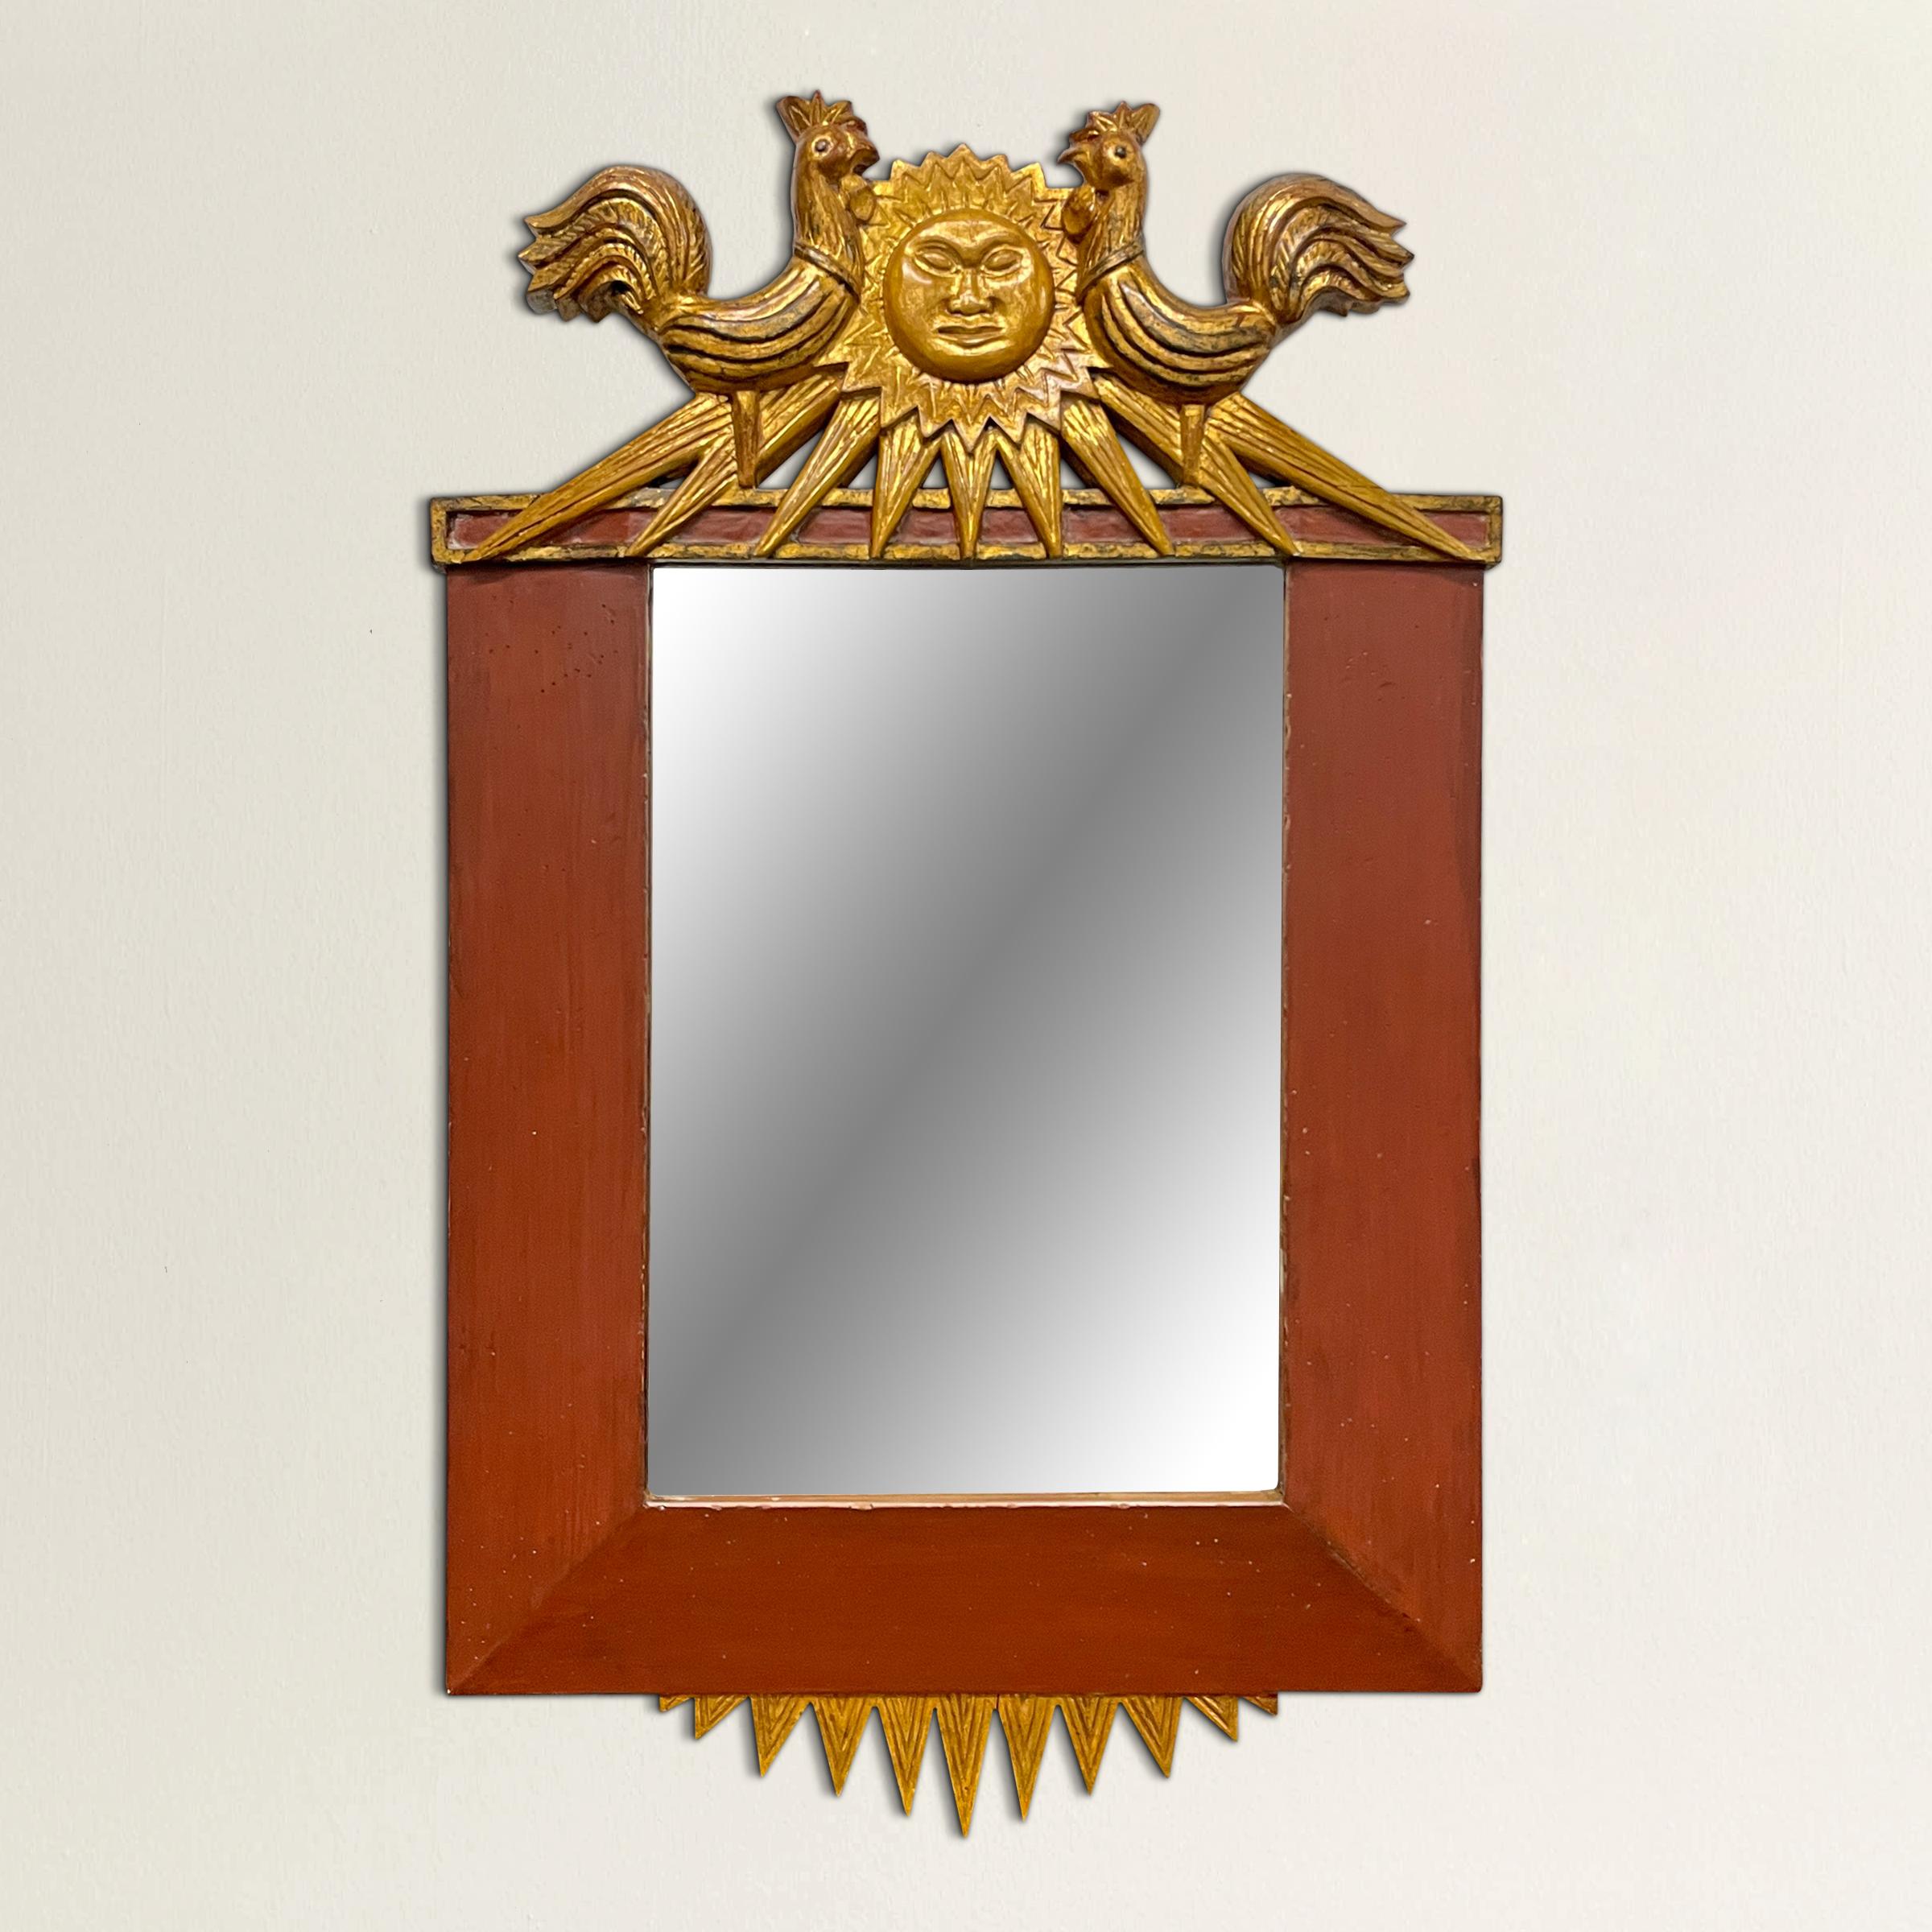 A striking 20th century Italian Empire-style framed mirror with a gilt wood crown depicting two large roosters flanking a gilt sunburst with a face, more gilt wood sun rays at the bottom, and wide beveled brick red painted frame with gilt sides.